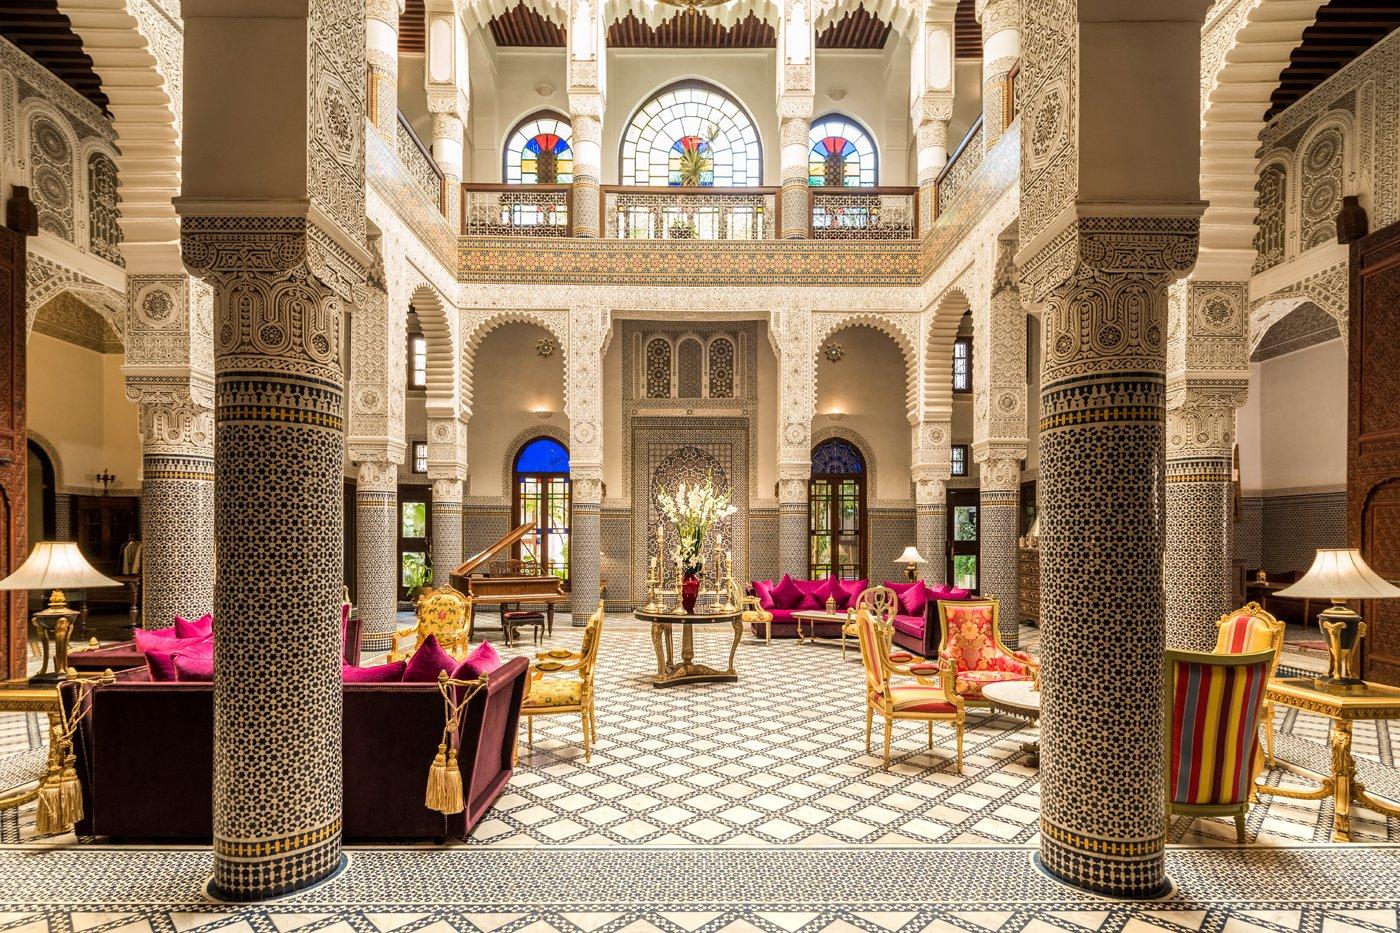 Riad Fes - Relais and Châteaux from $111